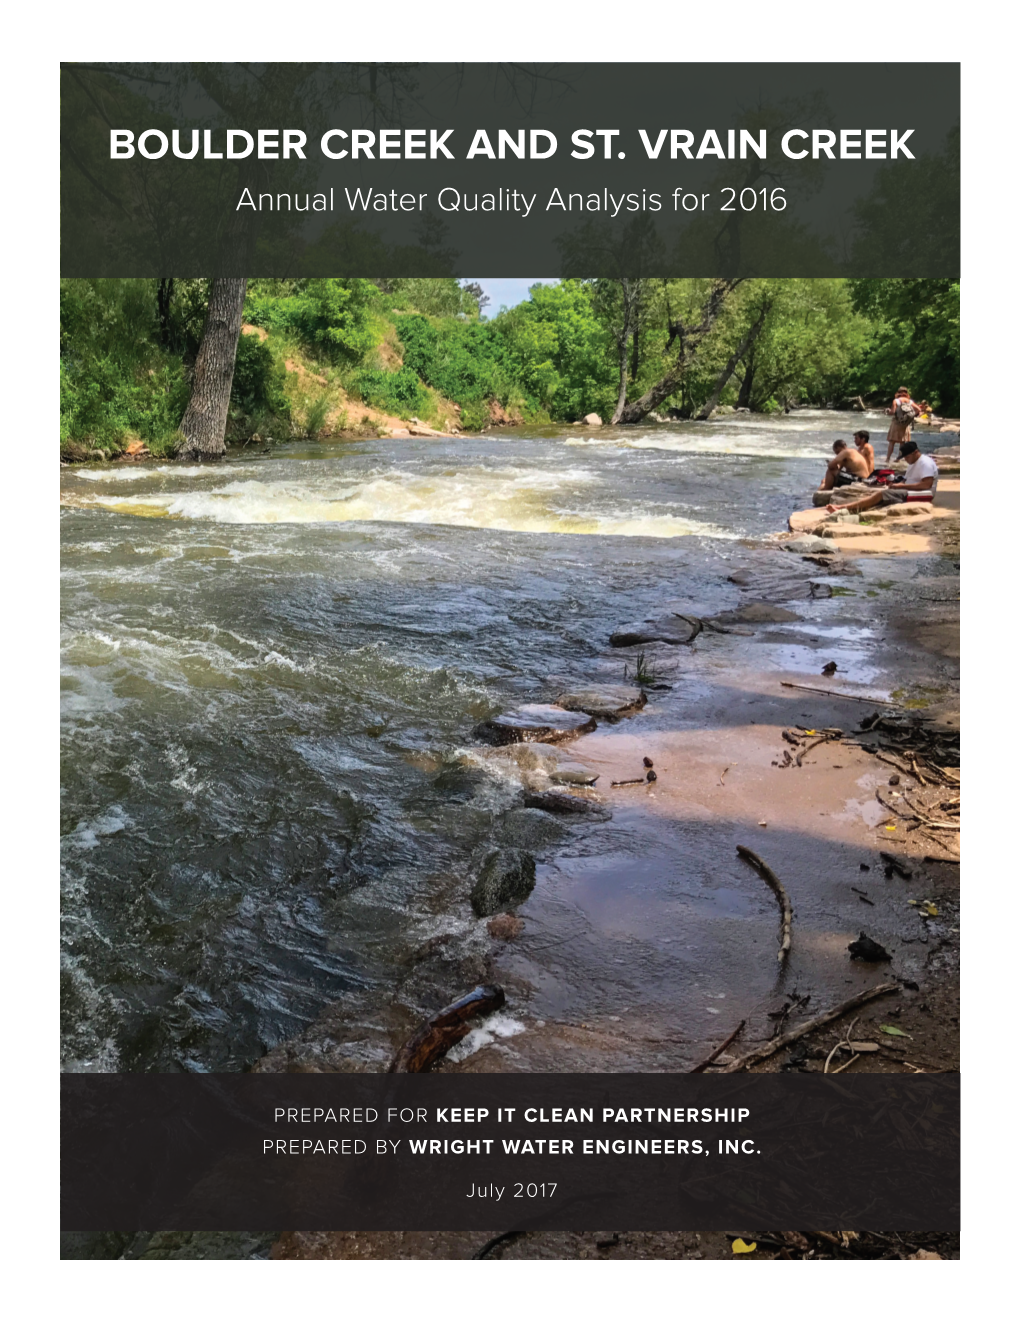 BOULDER CREEK and ST. VRAIN CREEK Annual Water Quality Analysis for 2016